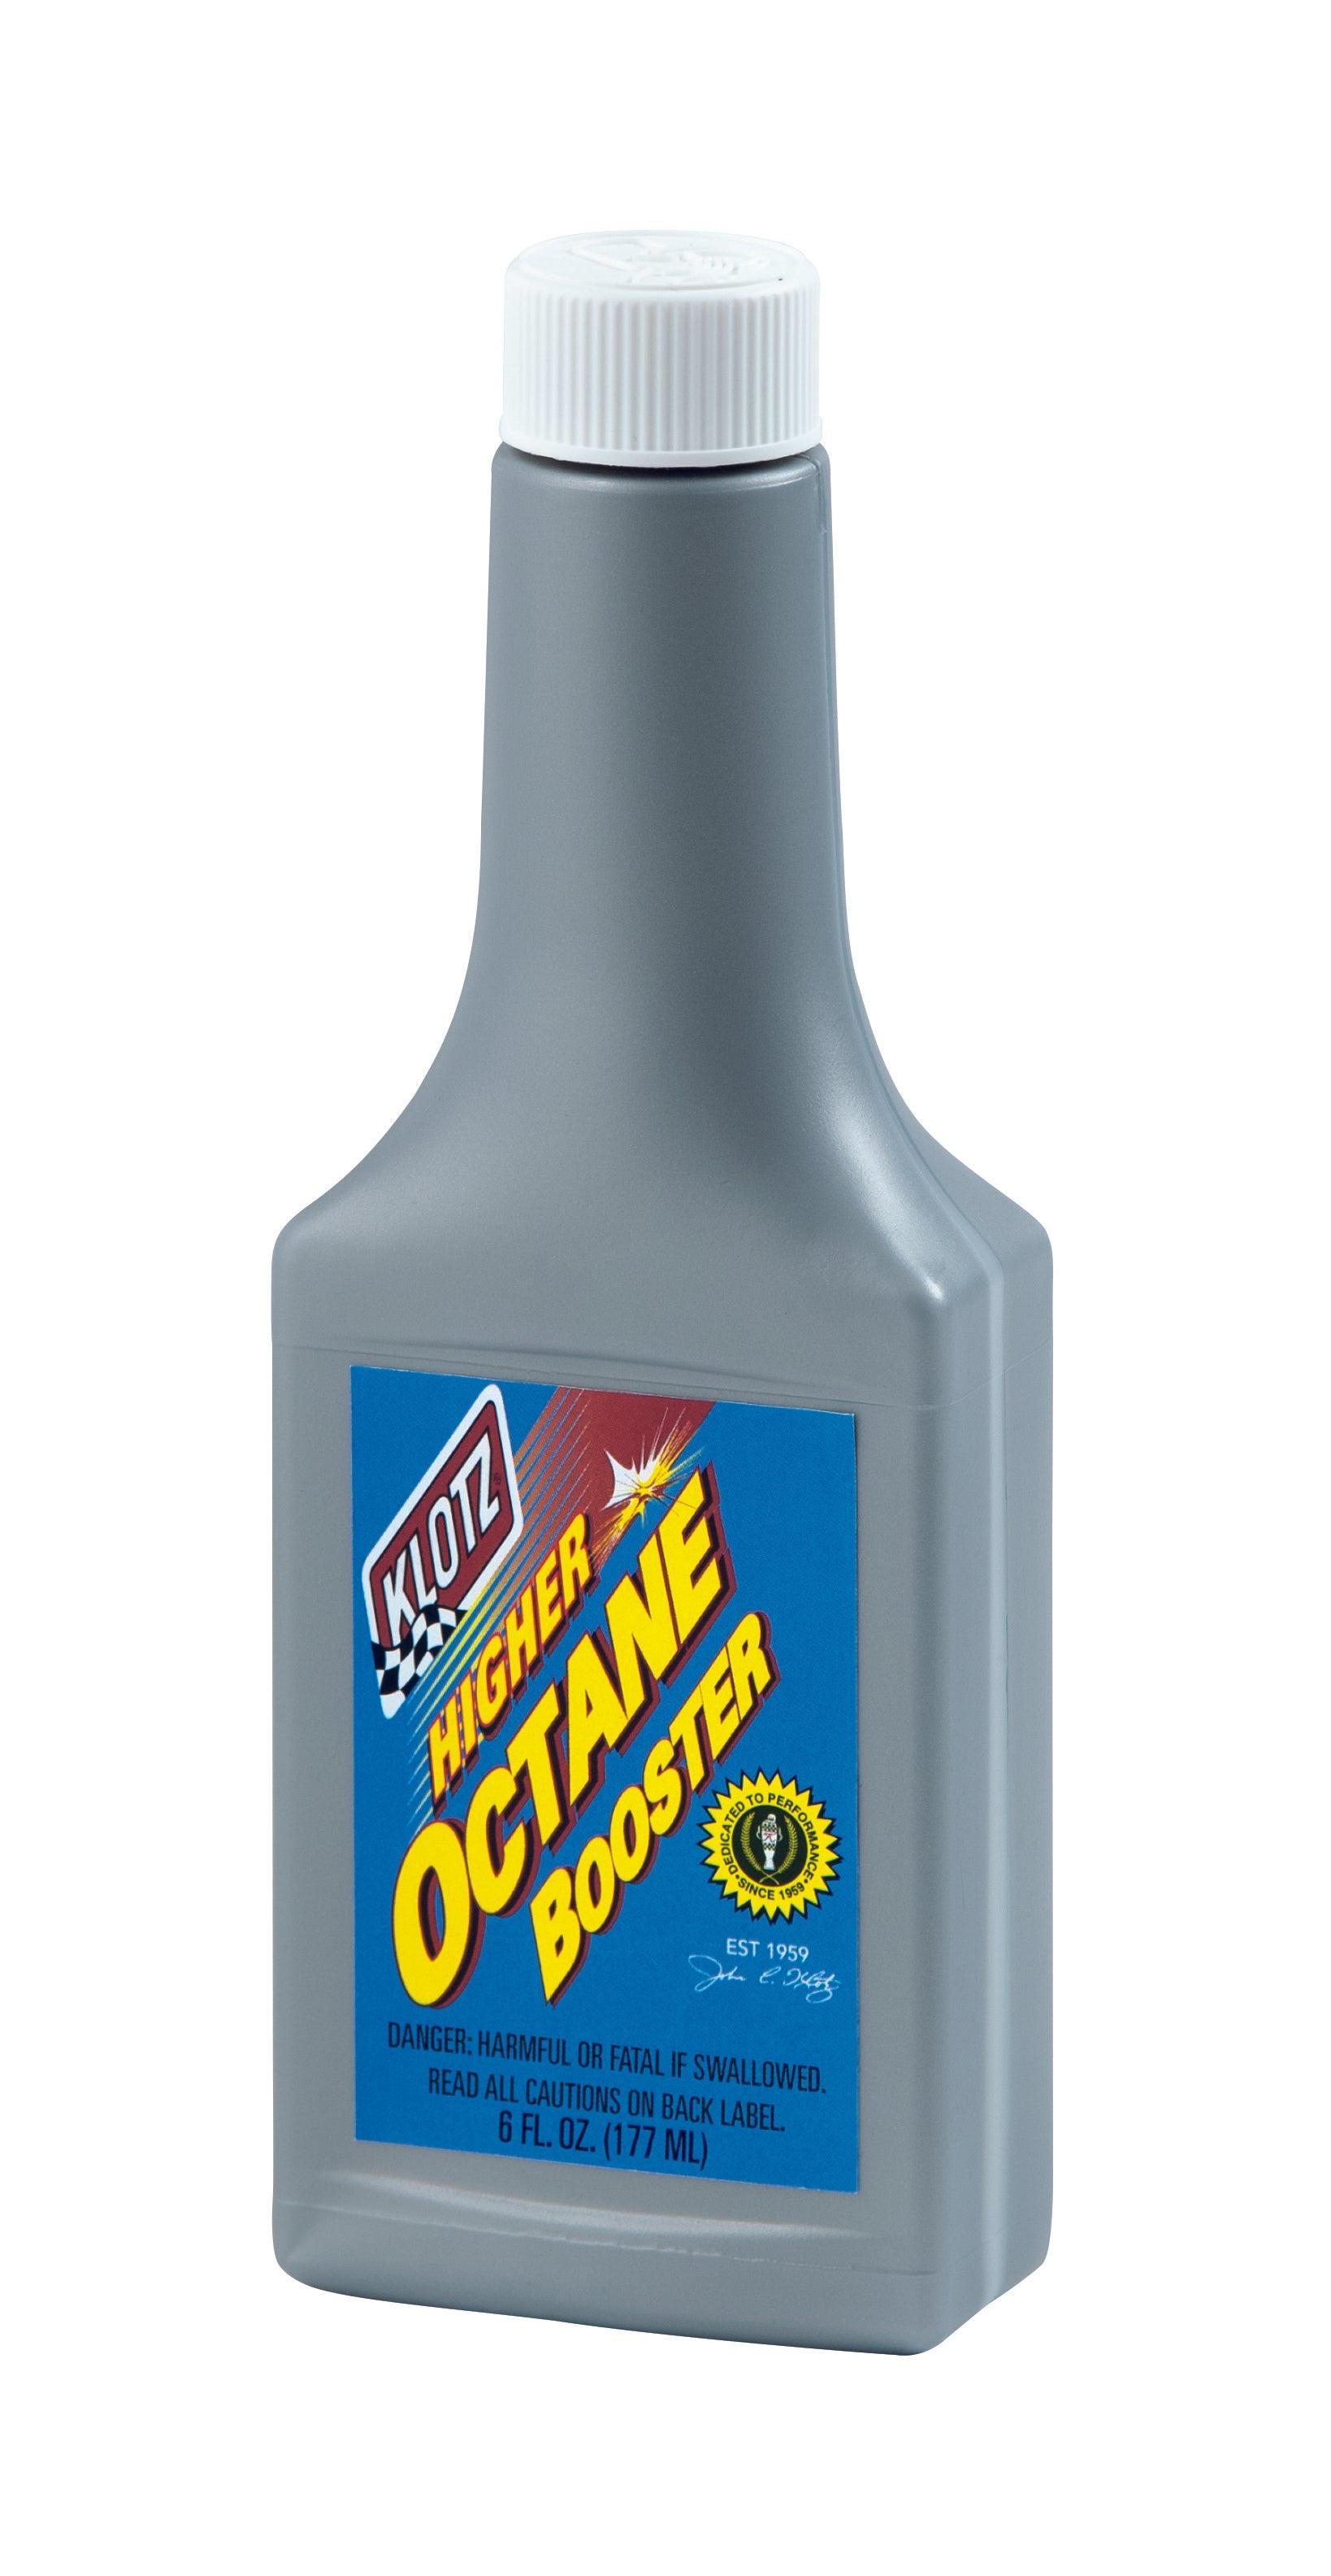 Higher Octane Booster 6 oz - Burlile Performance Products